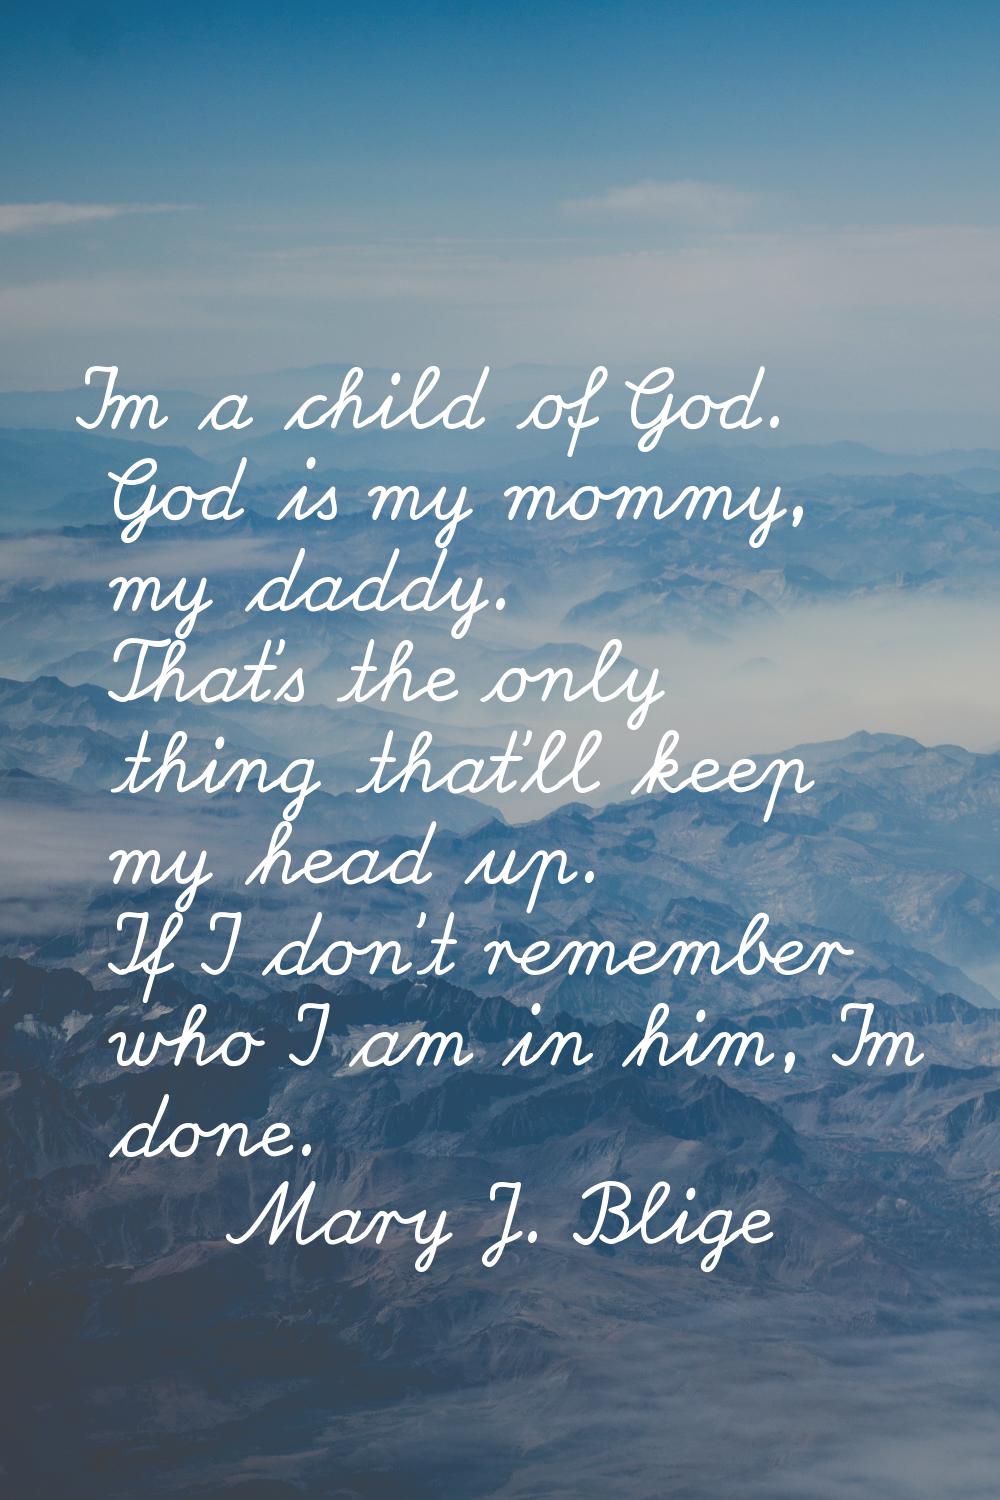 I'm a child of God. God is my mommy, my daddy. That's the only thing that'll keep my head up. If I 